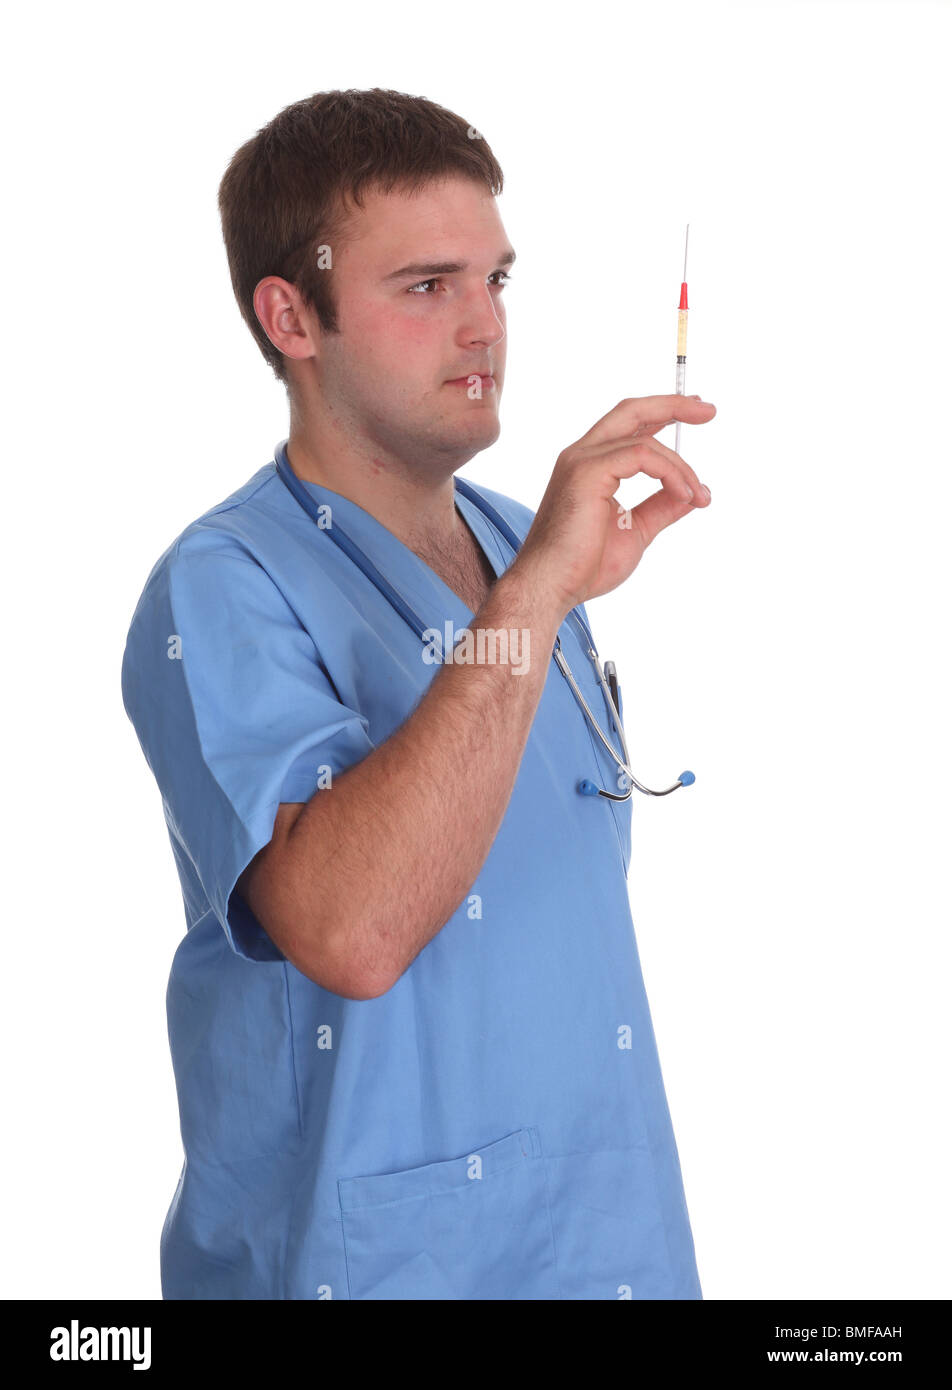 May 2010 - Young male model in medical scrubs as a male nurse, Stock Photo